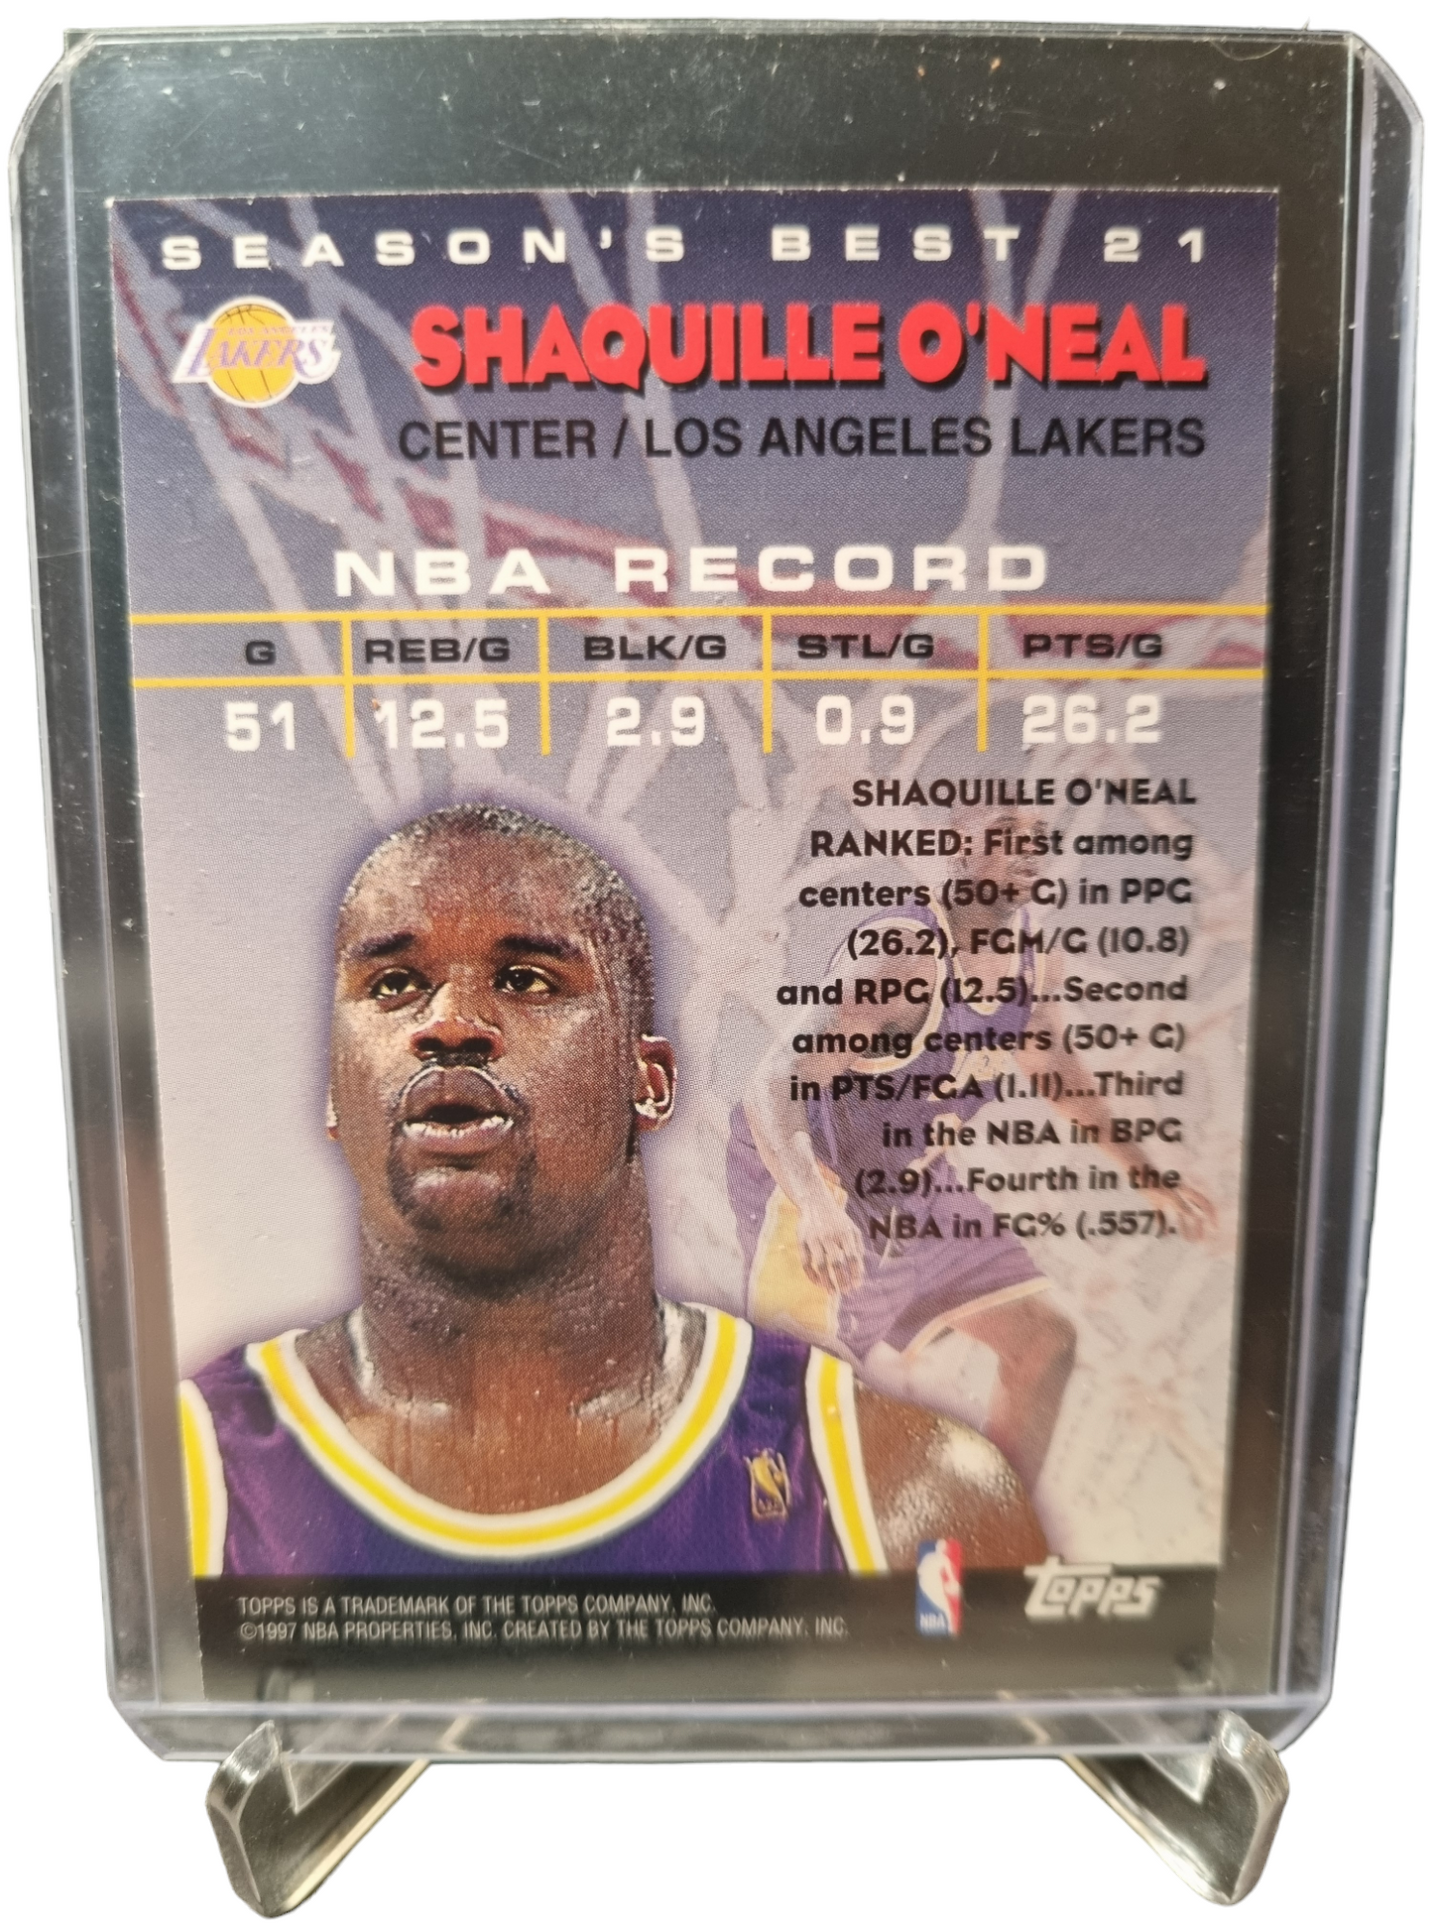 1997 Topps #21 Shaquille O'Neal Key Master